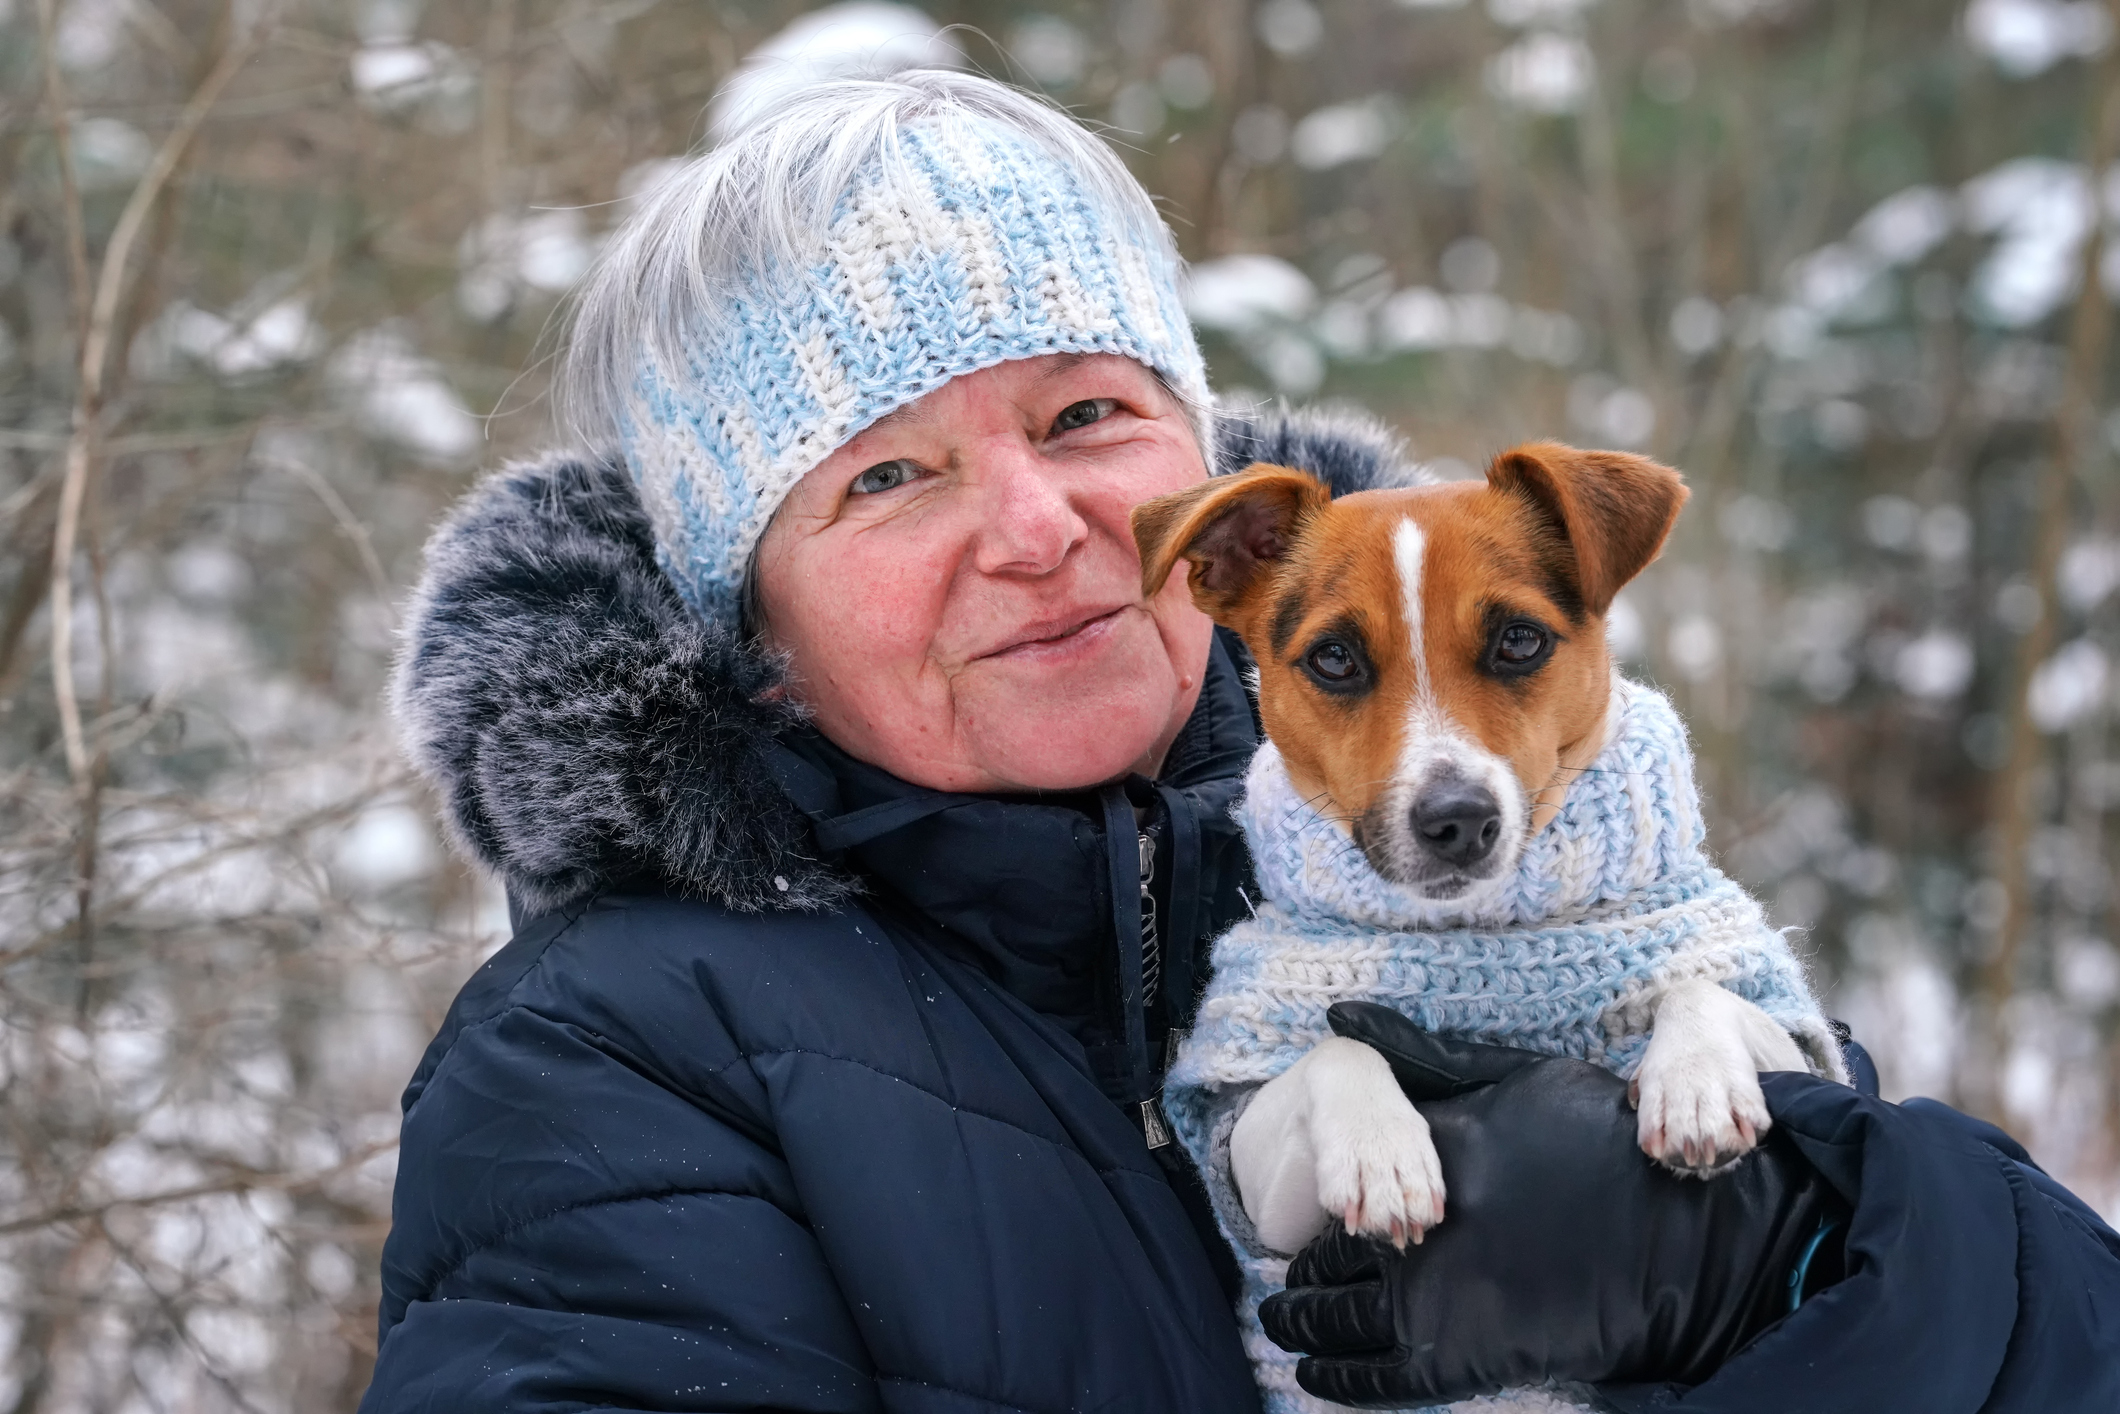 Woman and dog wearing matching crocheted sweater and ear warmer